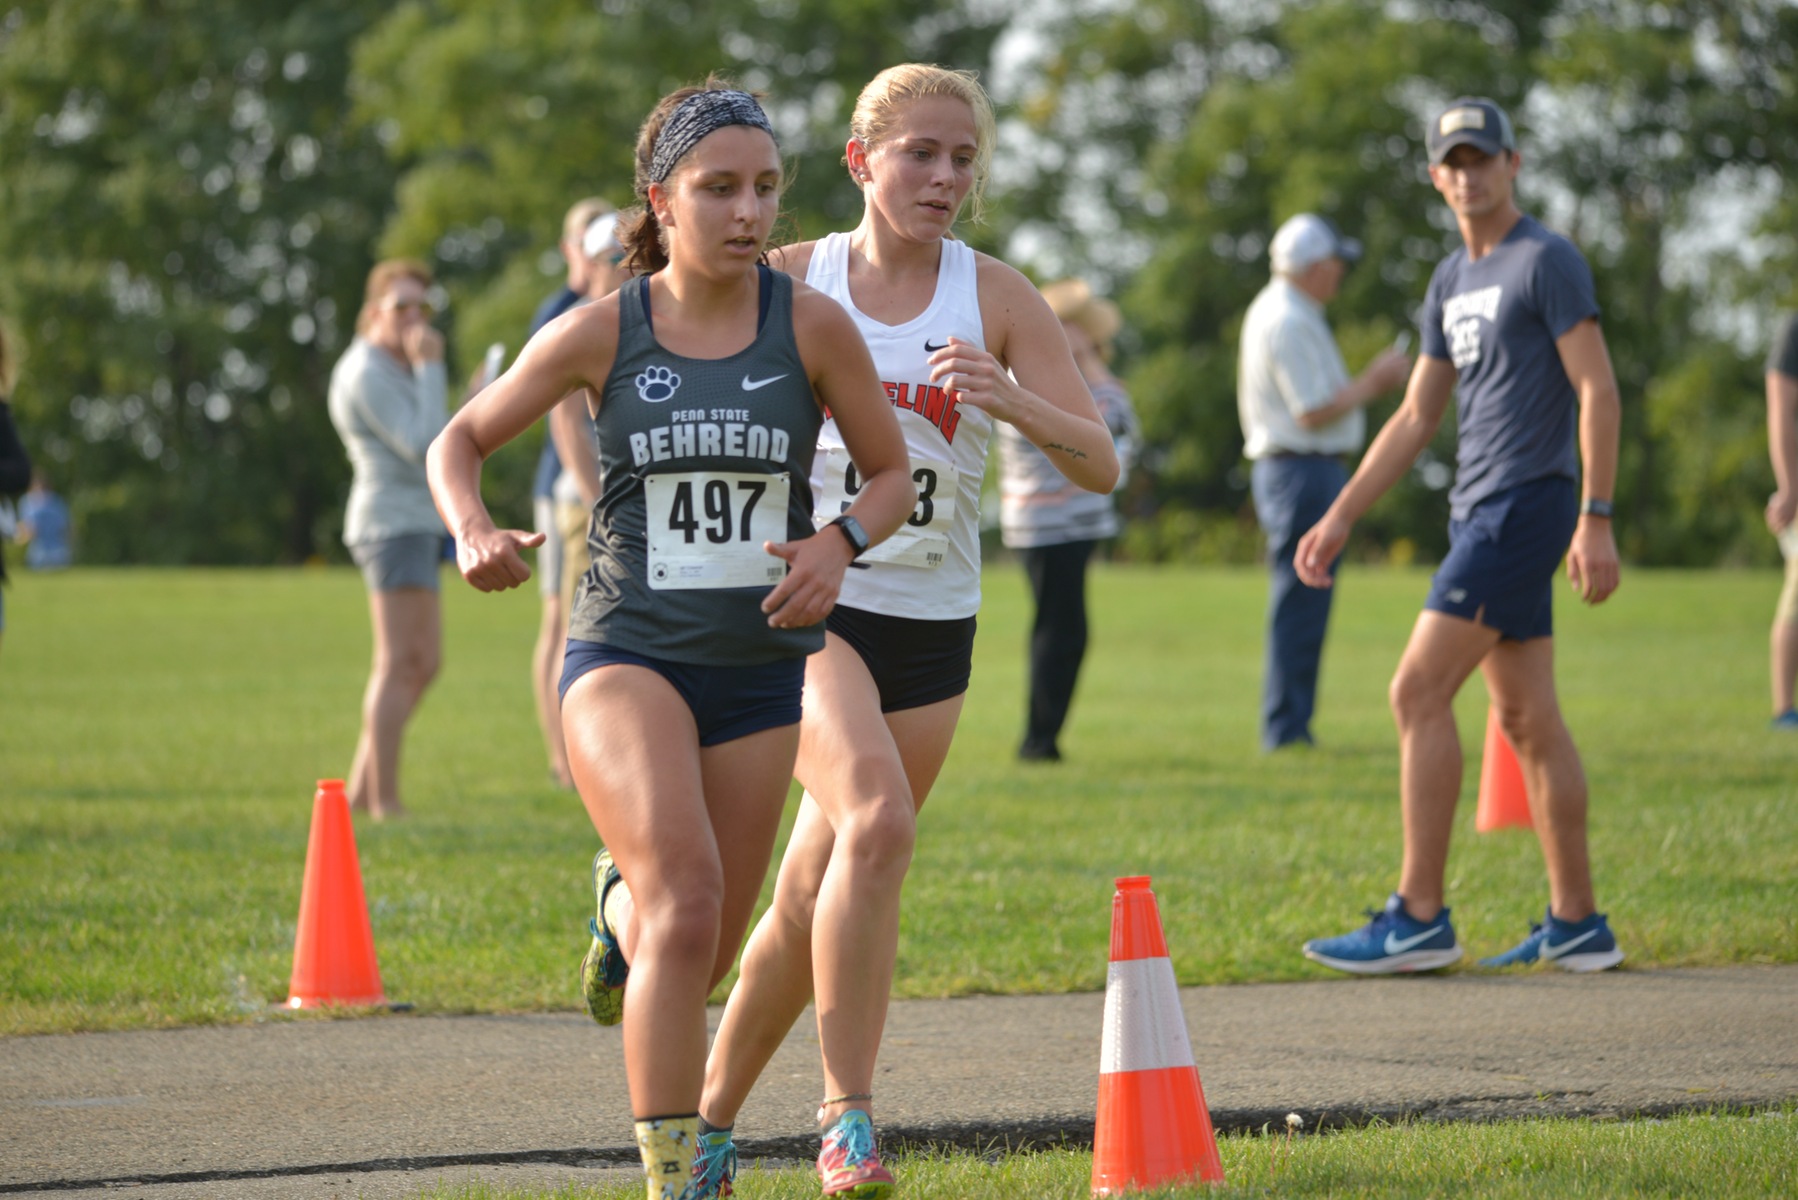 Lions Compete in Inter-Regional Rumble; Crissman Finishes 15th